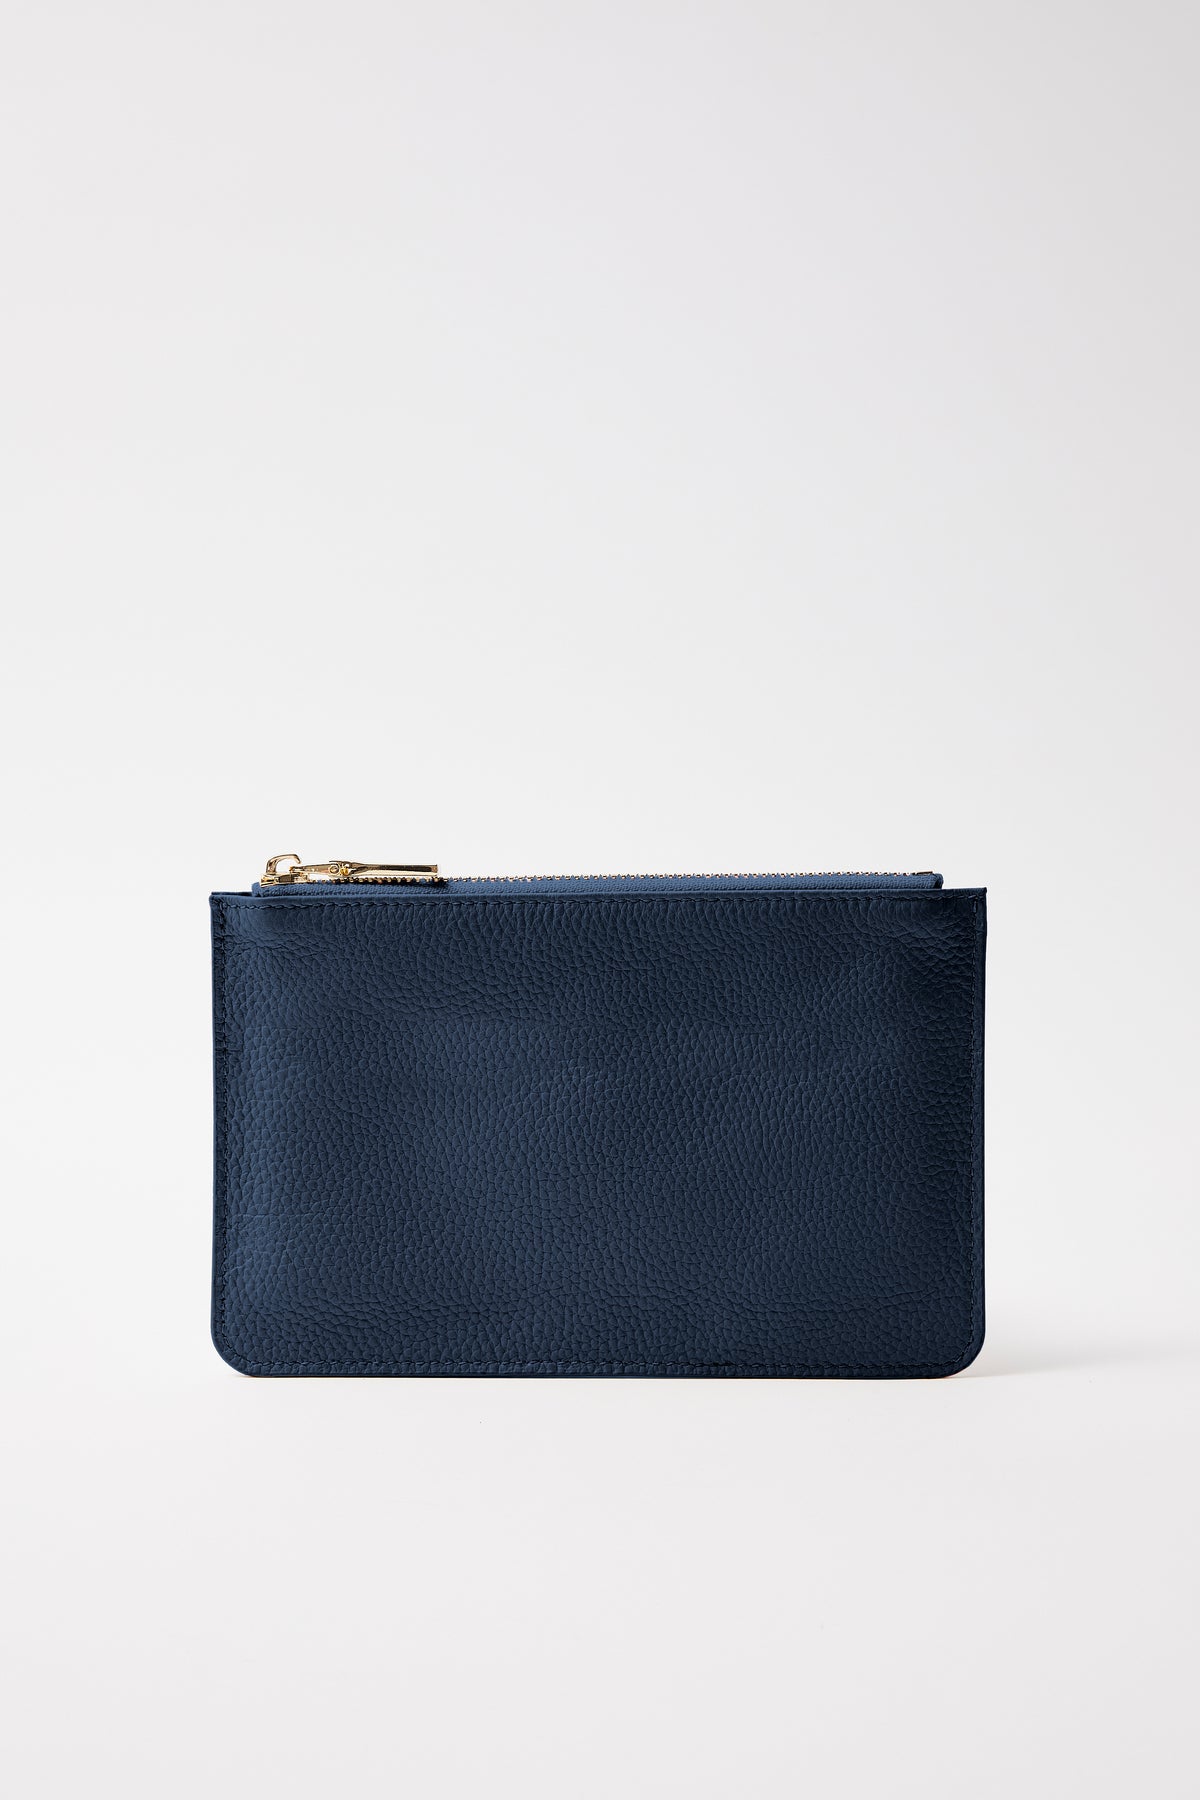 Small Leather Clutch | Midnight Navy Gold